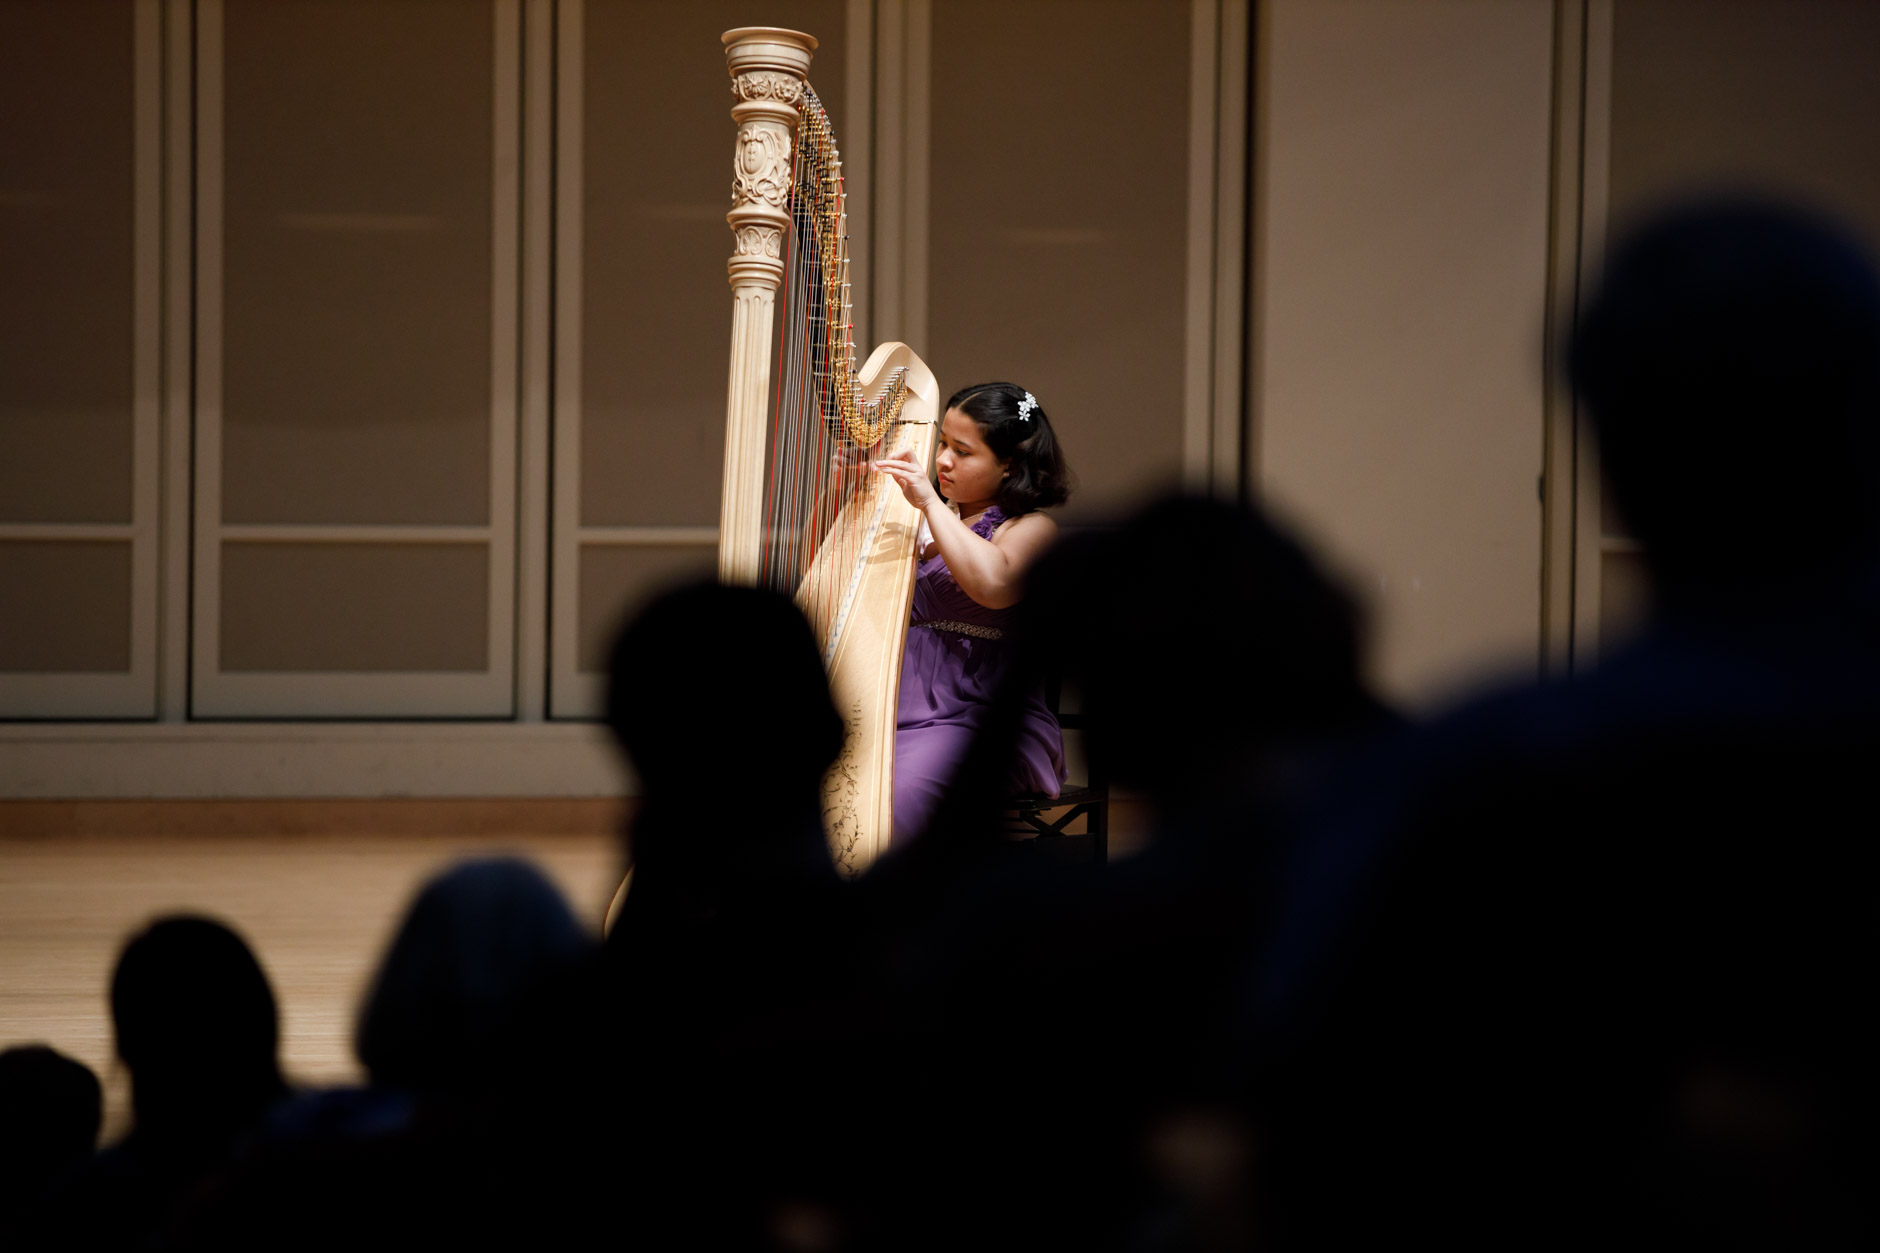 Renee Murphy performs during the Stars of Tomorrow Concert at the 11th USA International Harp Competition at Indiana University in Bloomington, Indiana on Thursday, July 11, 2019. (Photo by James Brosher)